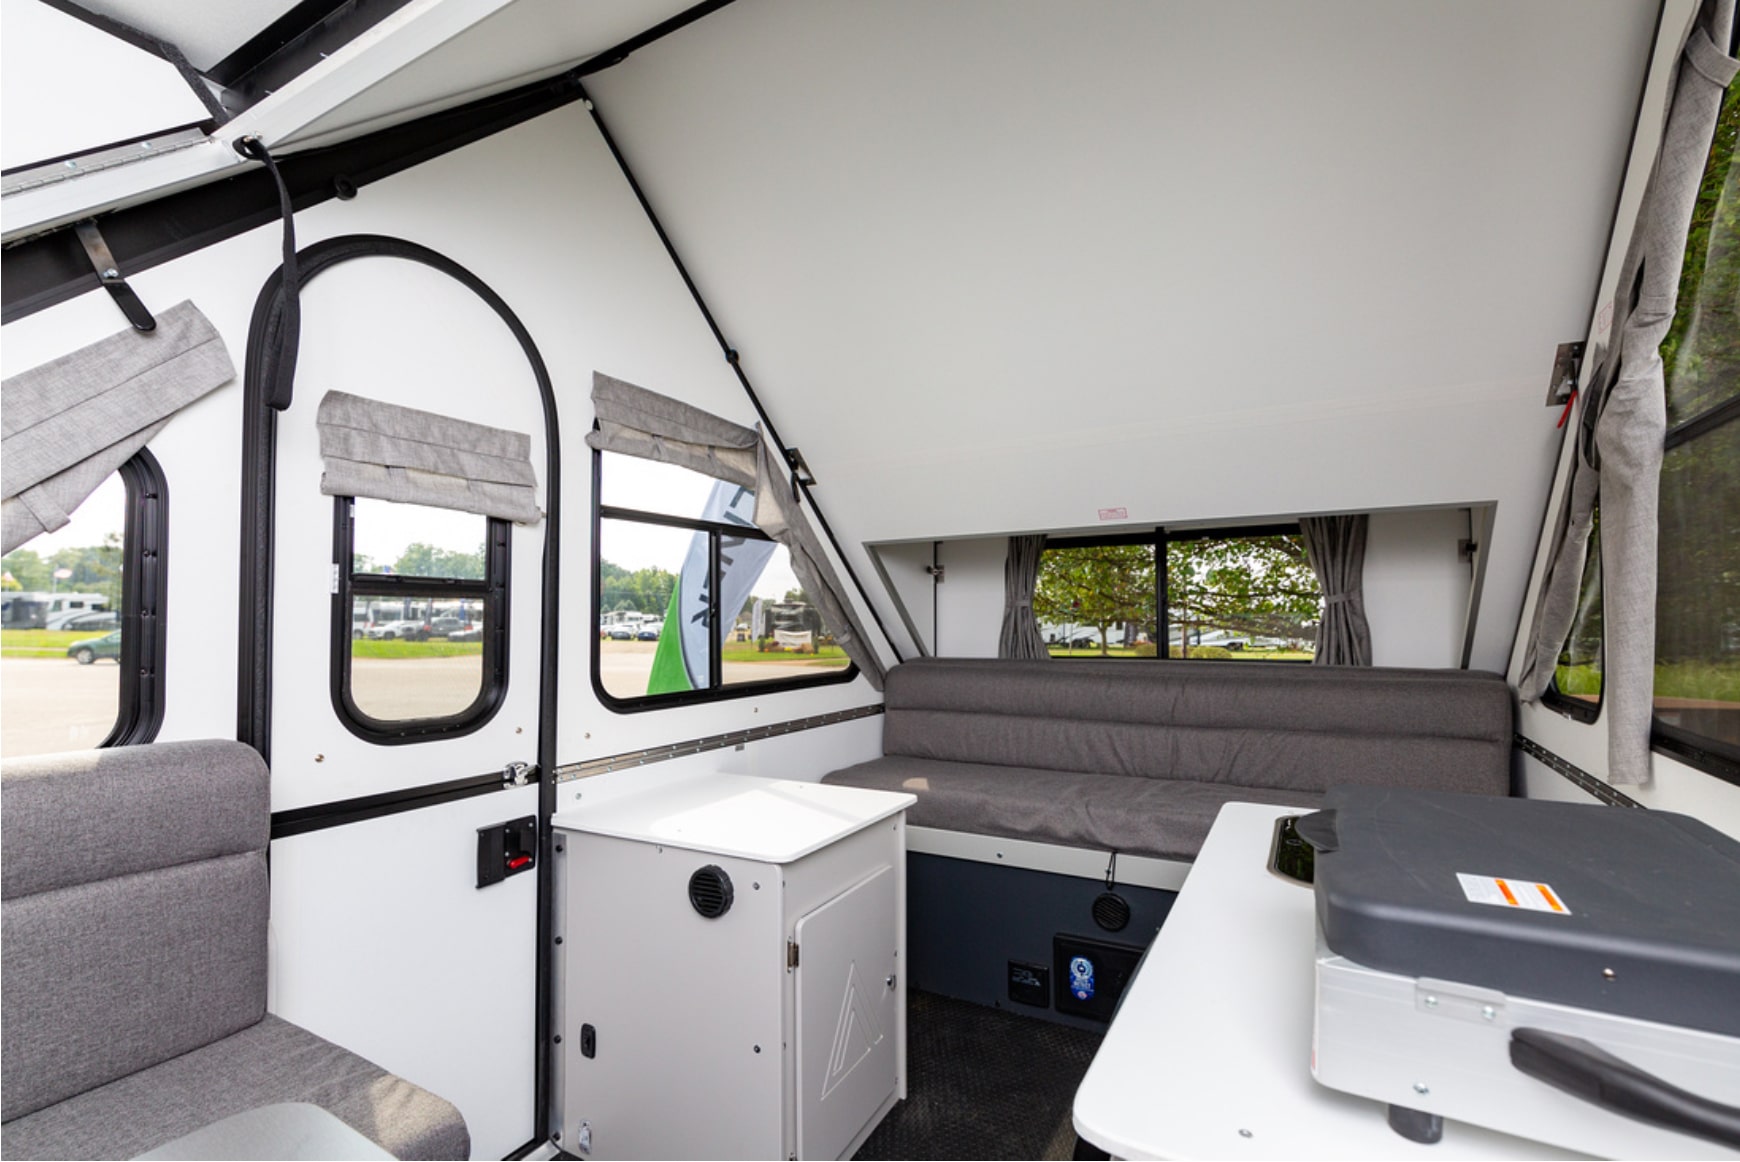 The interior of an rv with a couch and tv.